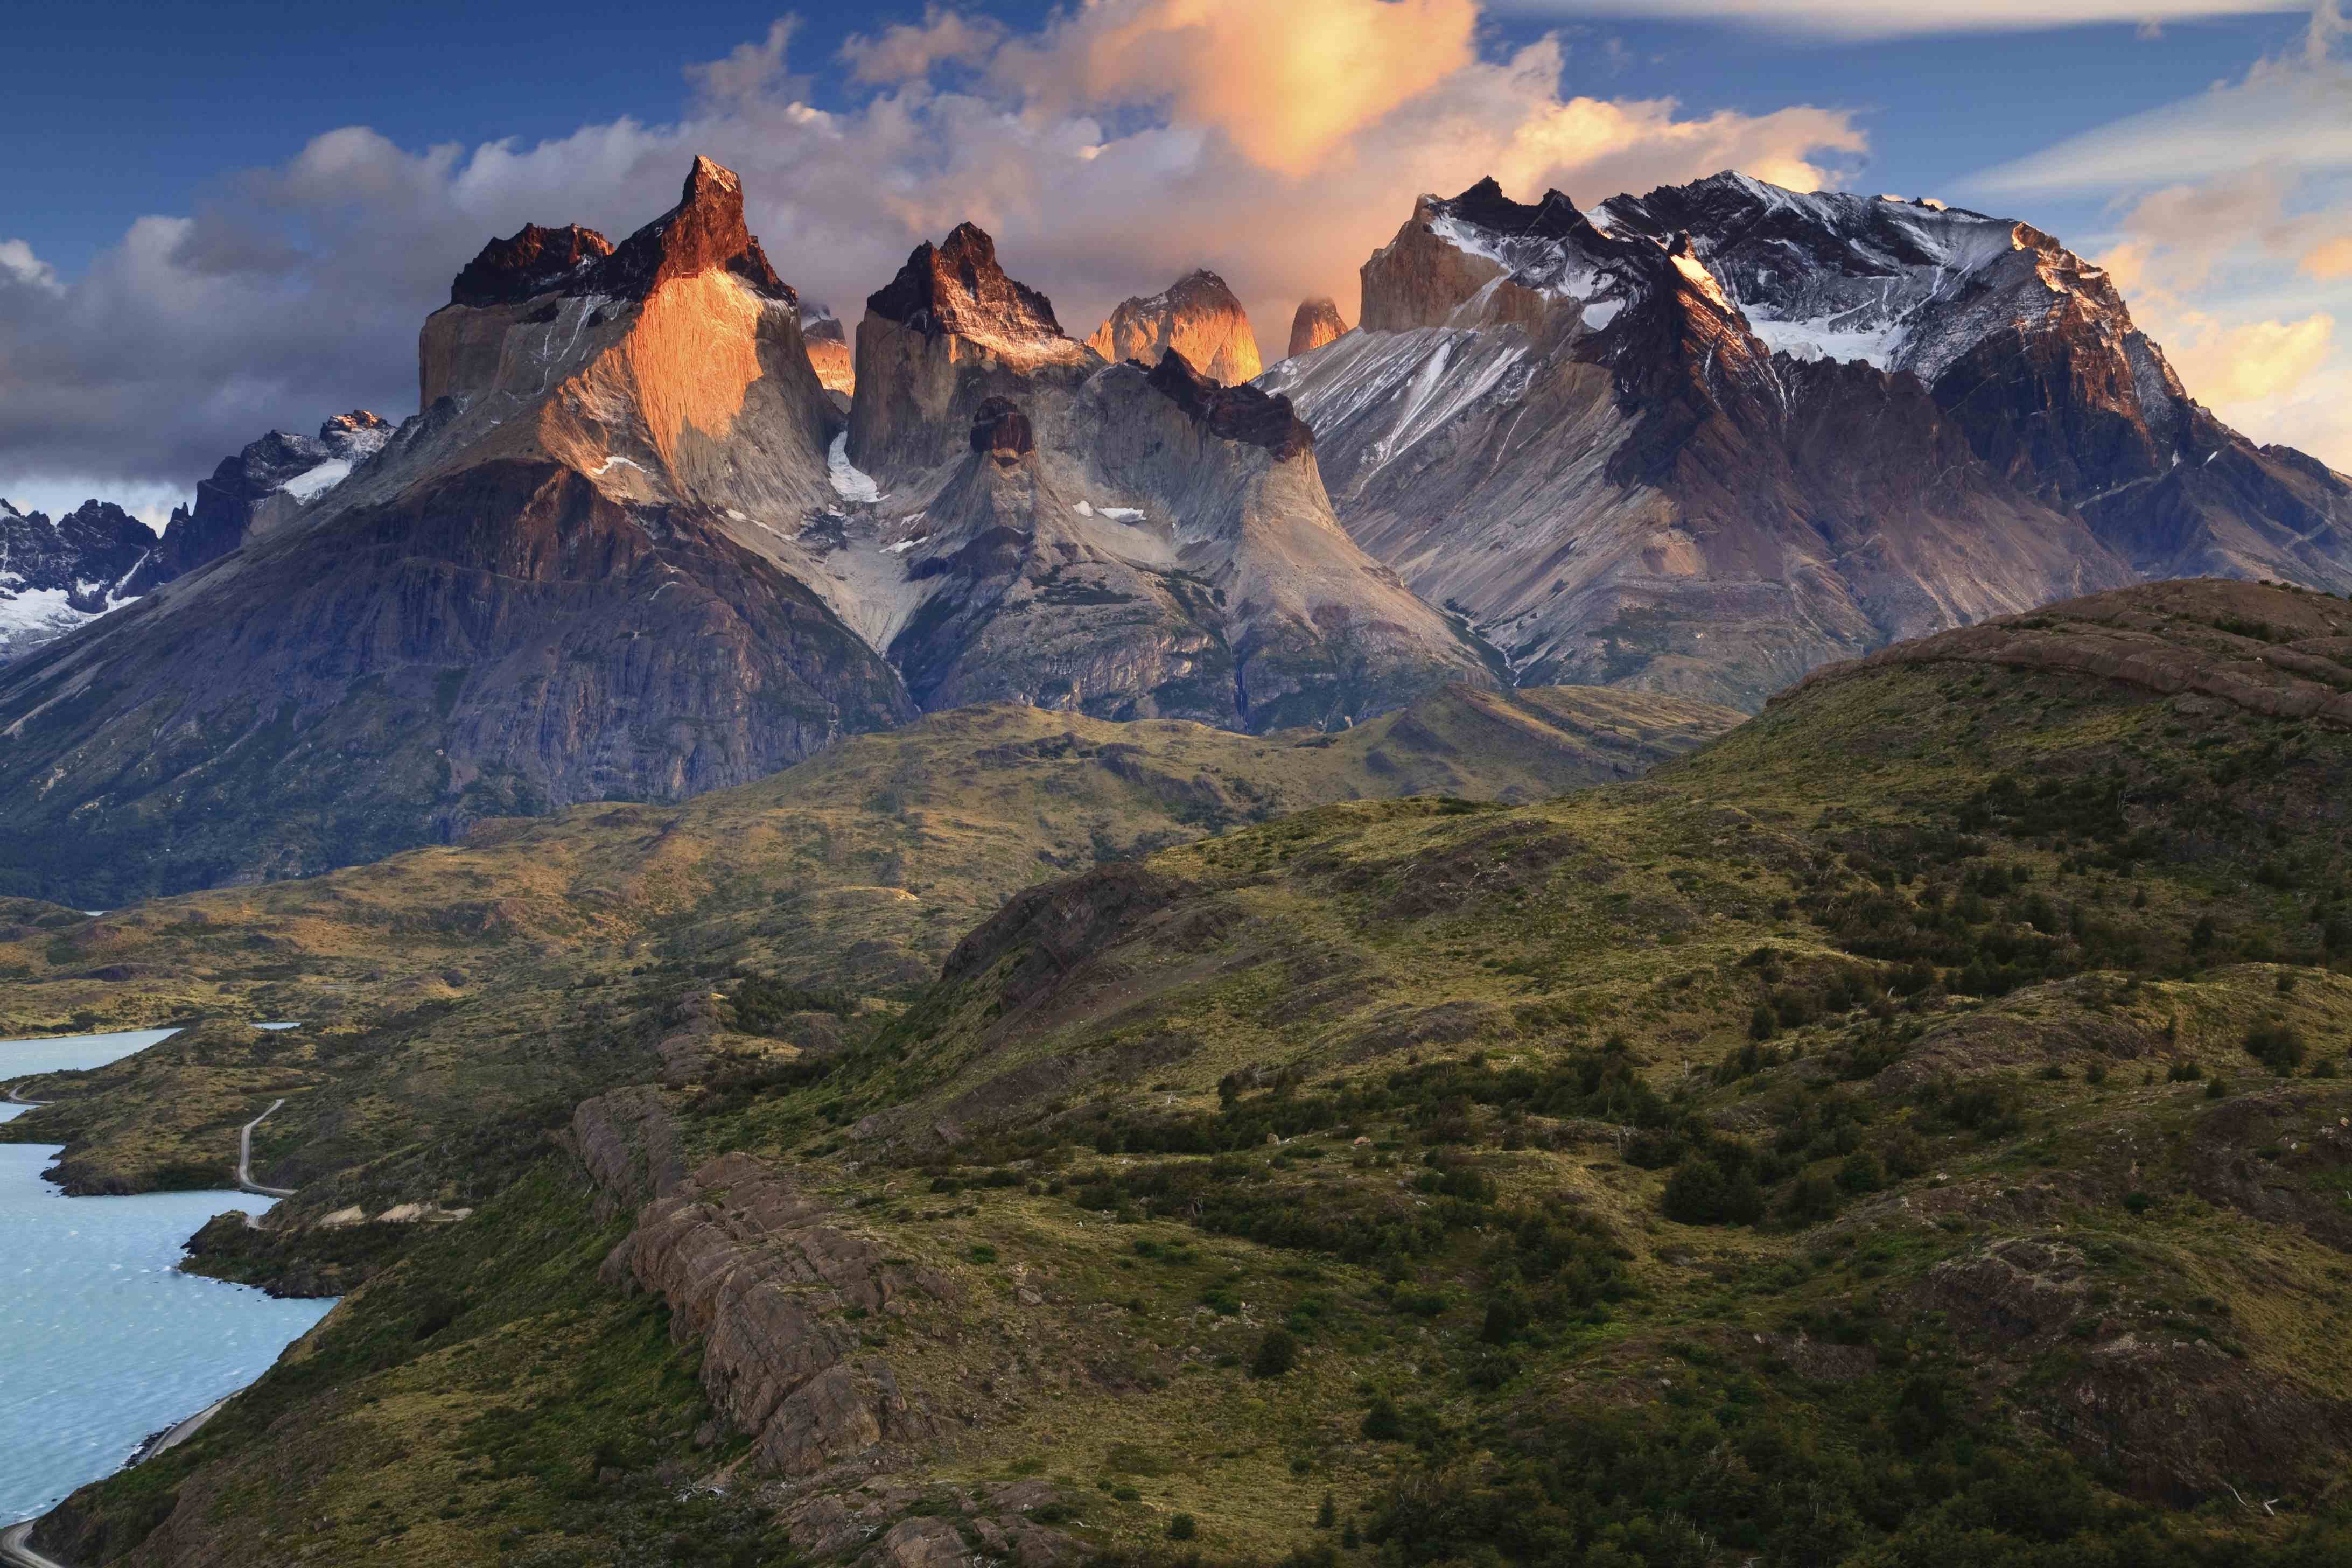 Patagonia 4k Wallpapers For Your Desktop Or Mobile Screen Free And Easy To Download